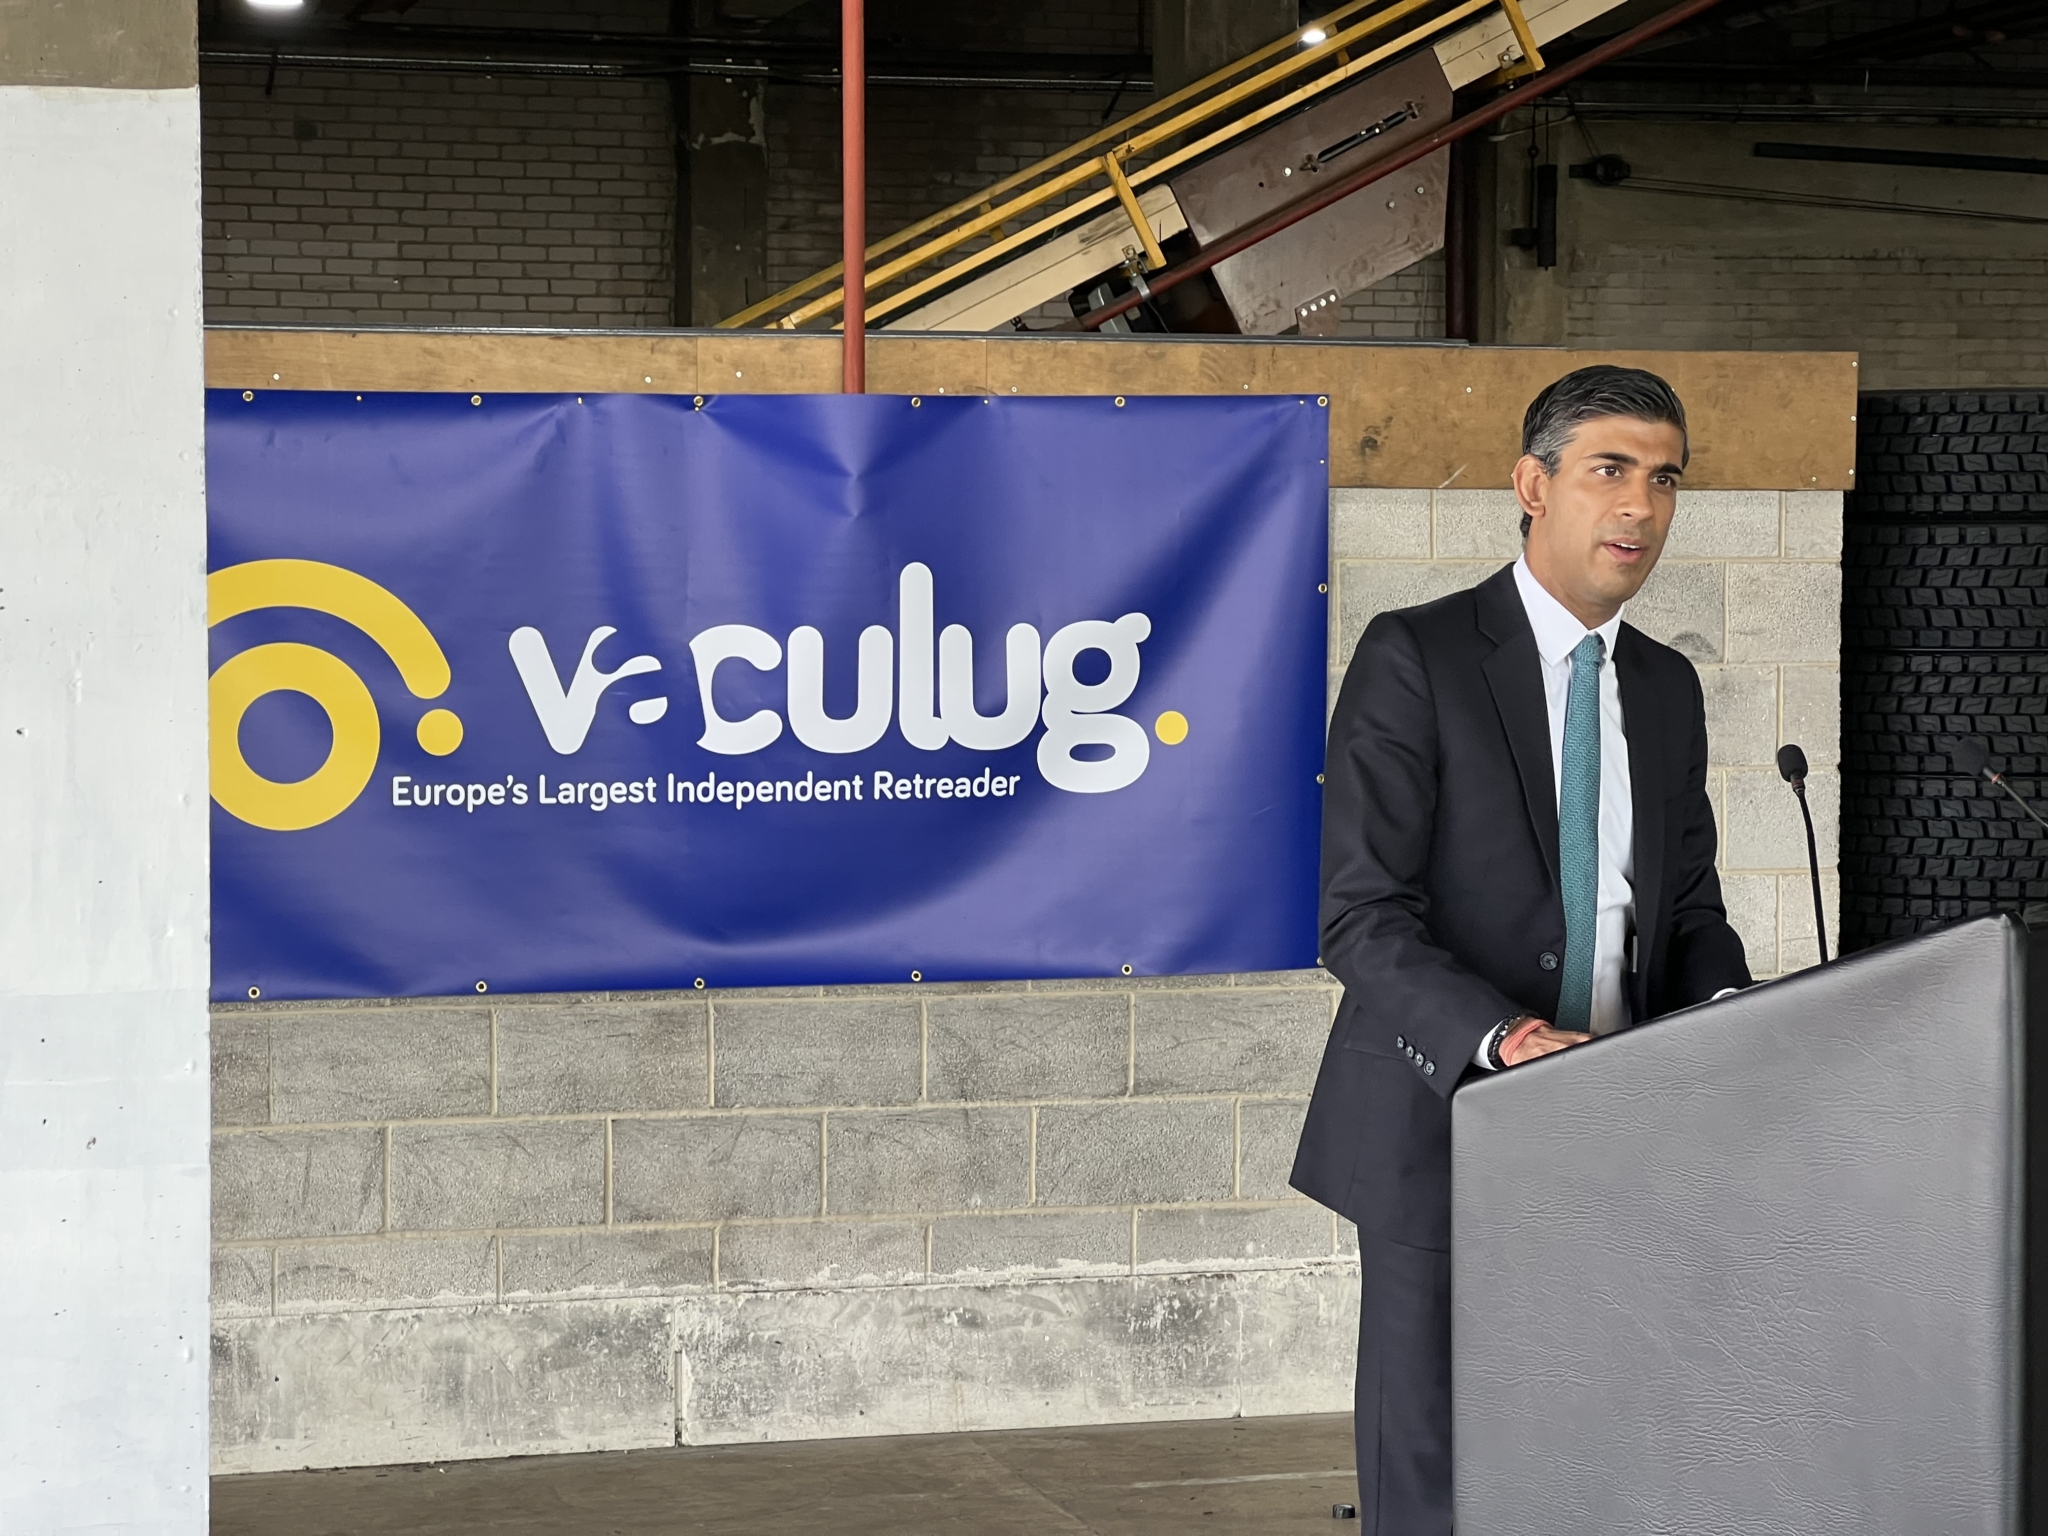 Rishi Sunak launches prime ministerial campaign at Vaculug